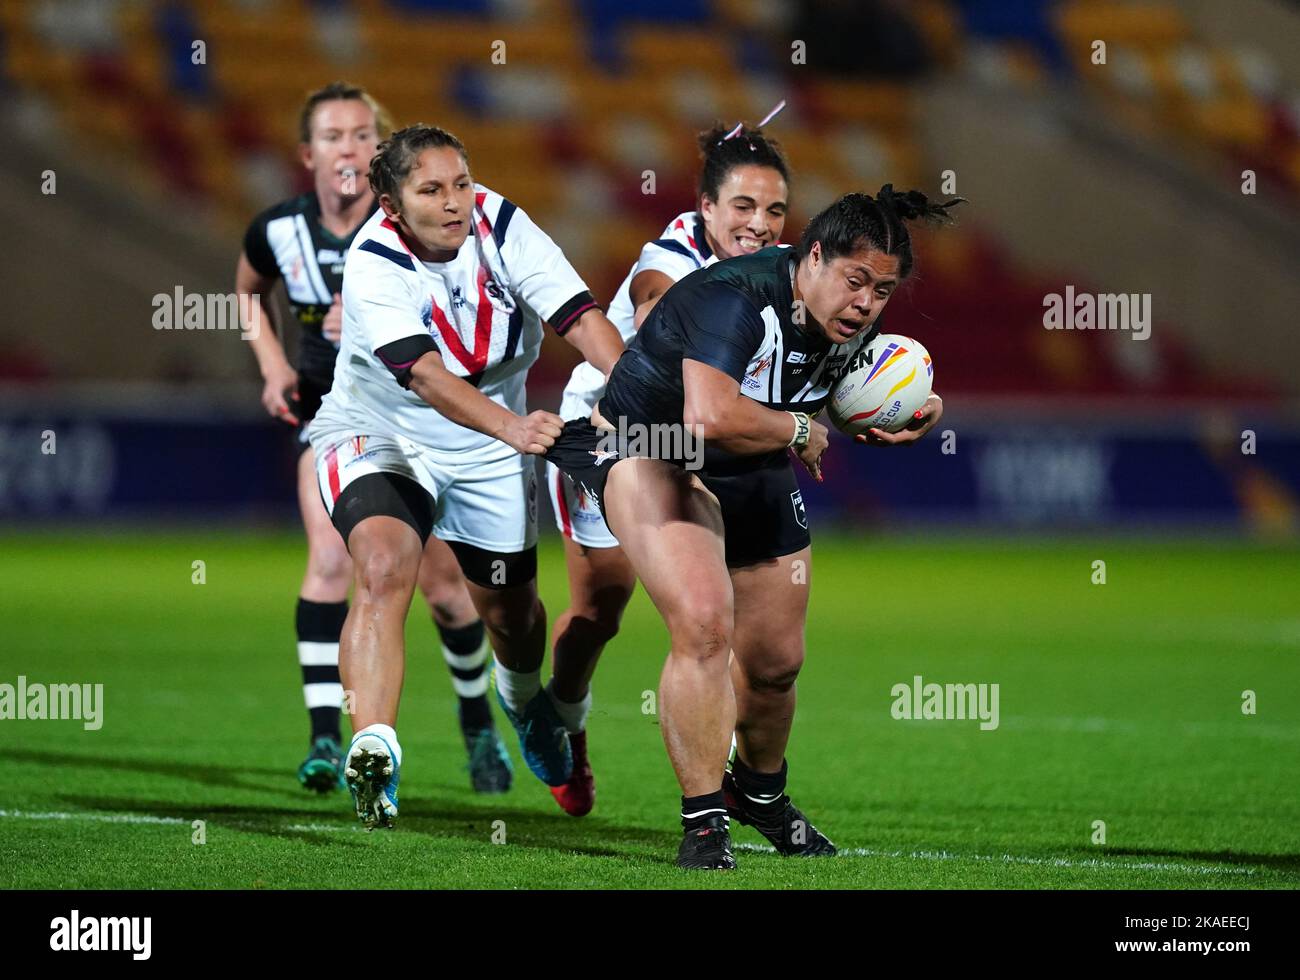 New Zealand's Annetta Nu'Uausala is tackled by France's Elisa Ciria and Leila Bessahli during the Women's Rugby League World Cup group B match at the LNER Community Stadium, York. Picture date: Wednesday November 2, 2022. Stock Photo